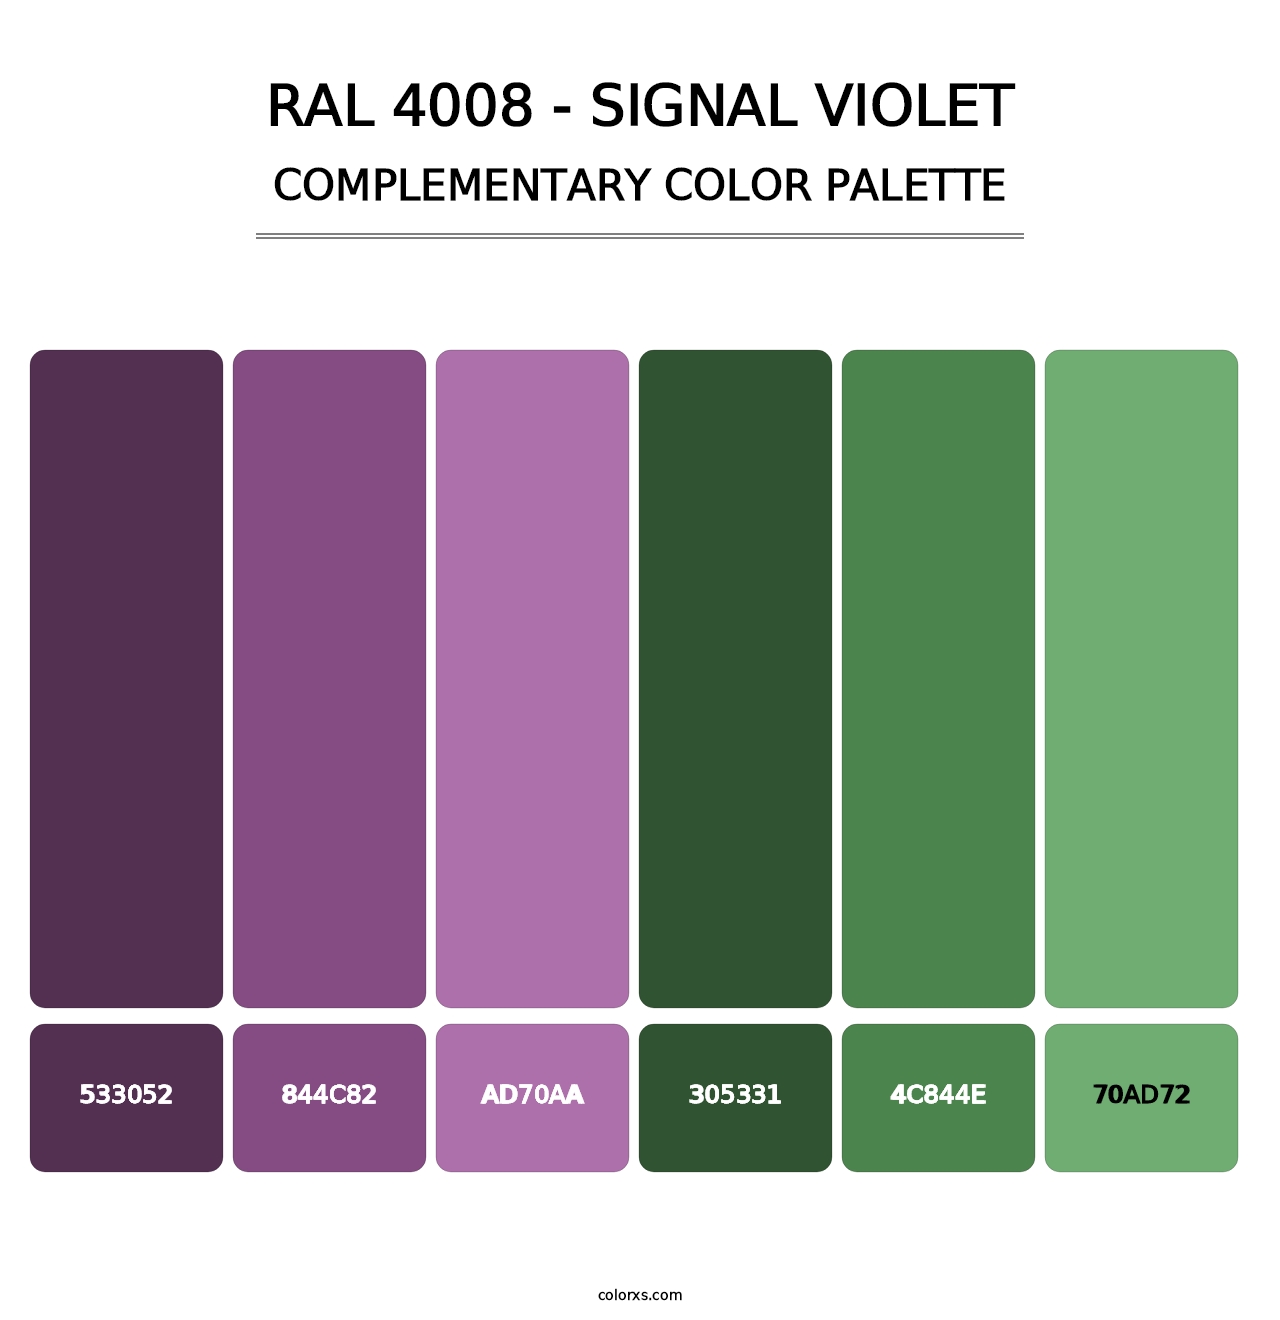 RAL 4008 - Signal Violet - Complementary Color Palette